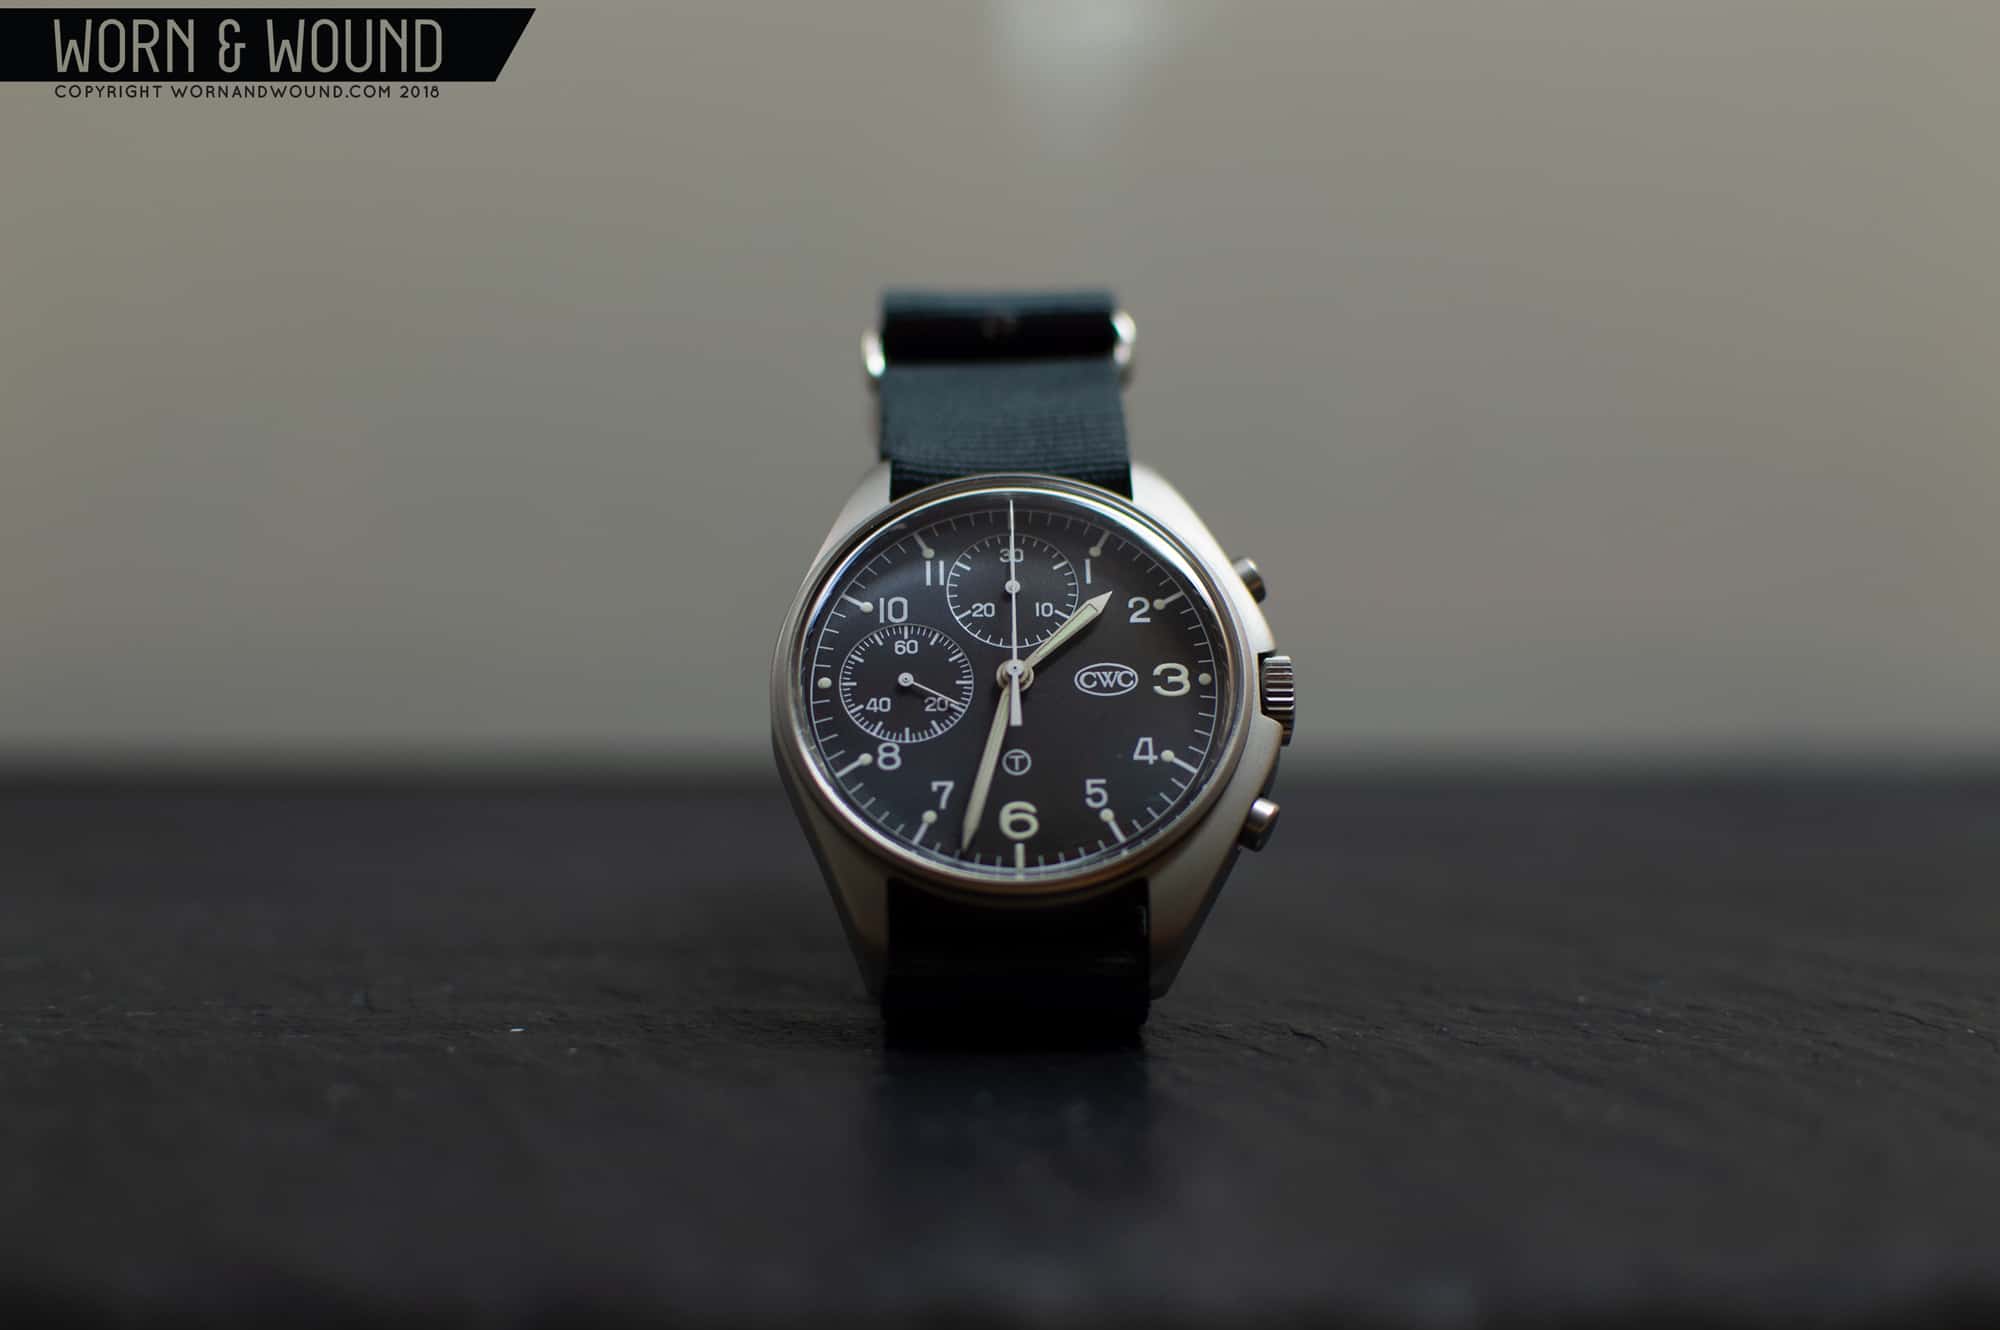 Hands-On With the CWC RN Fleet Air Arm Pilot’s Chronograph